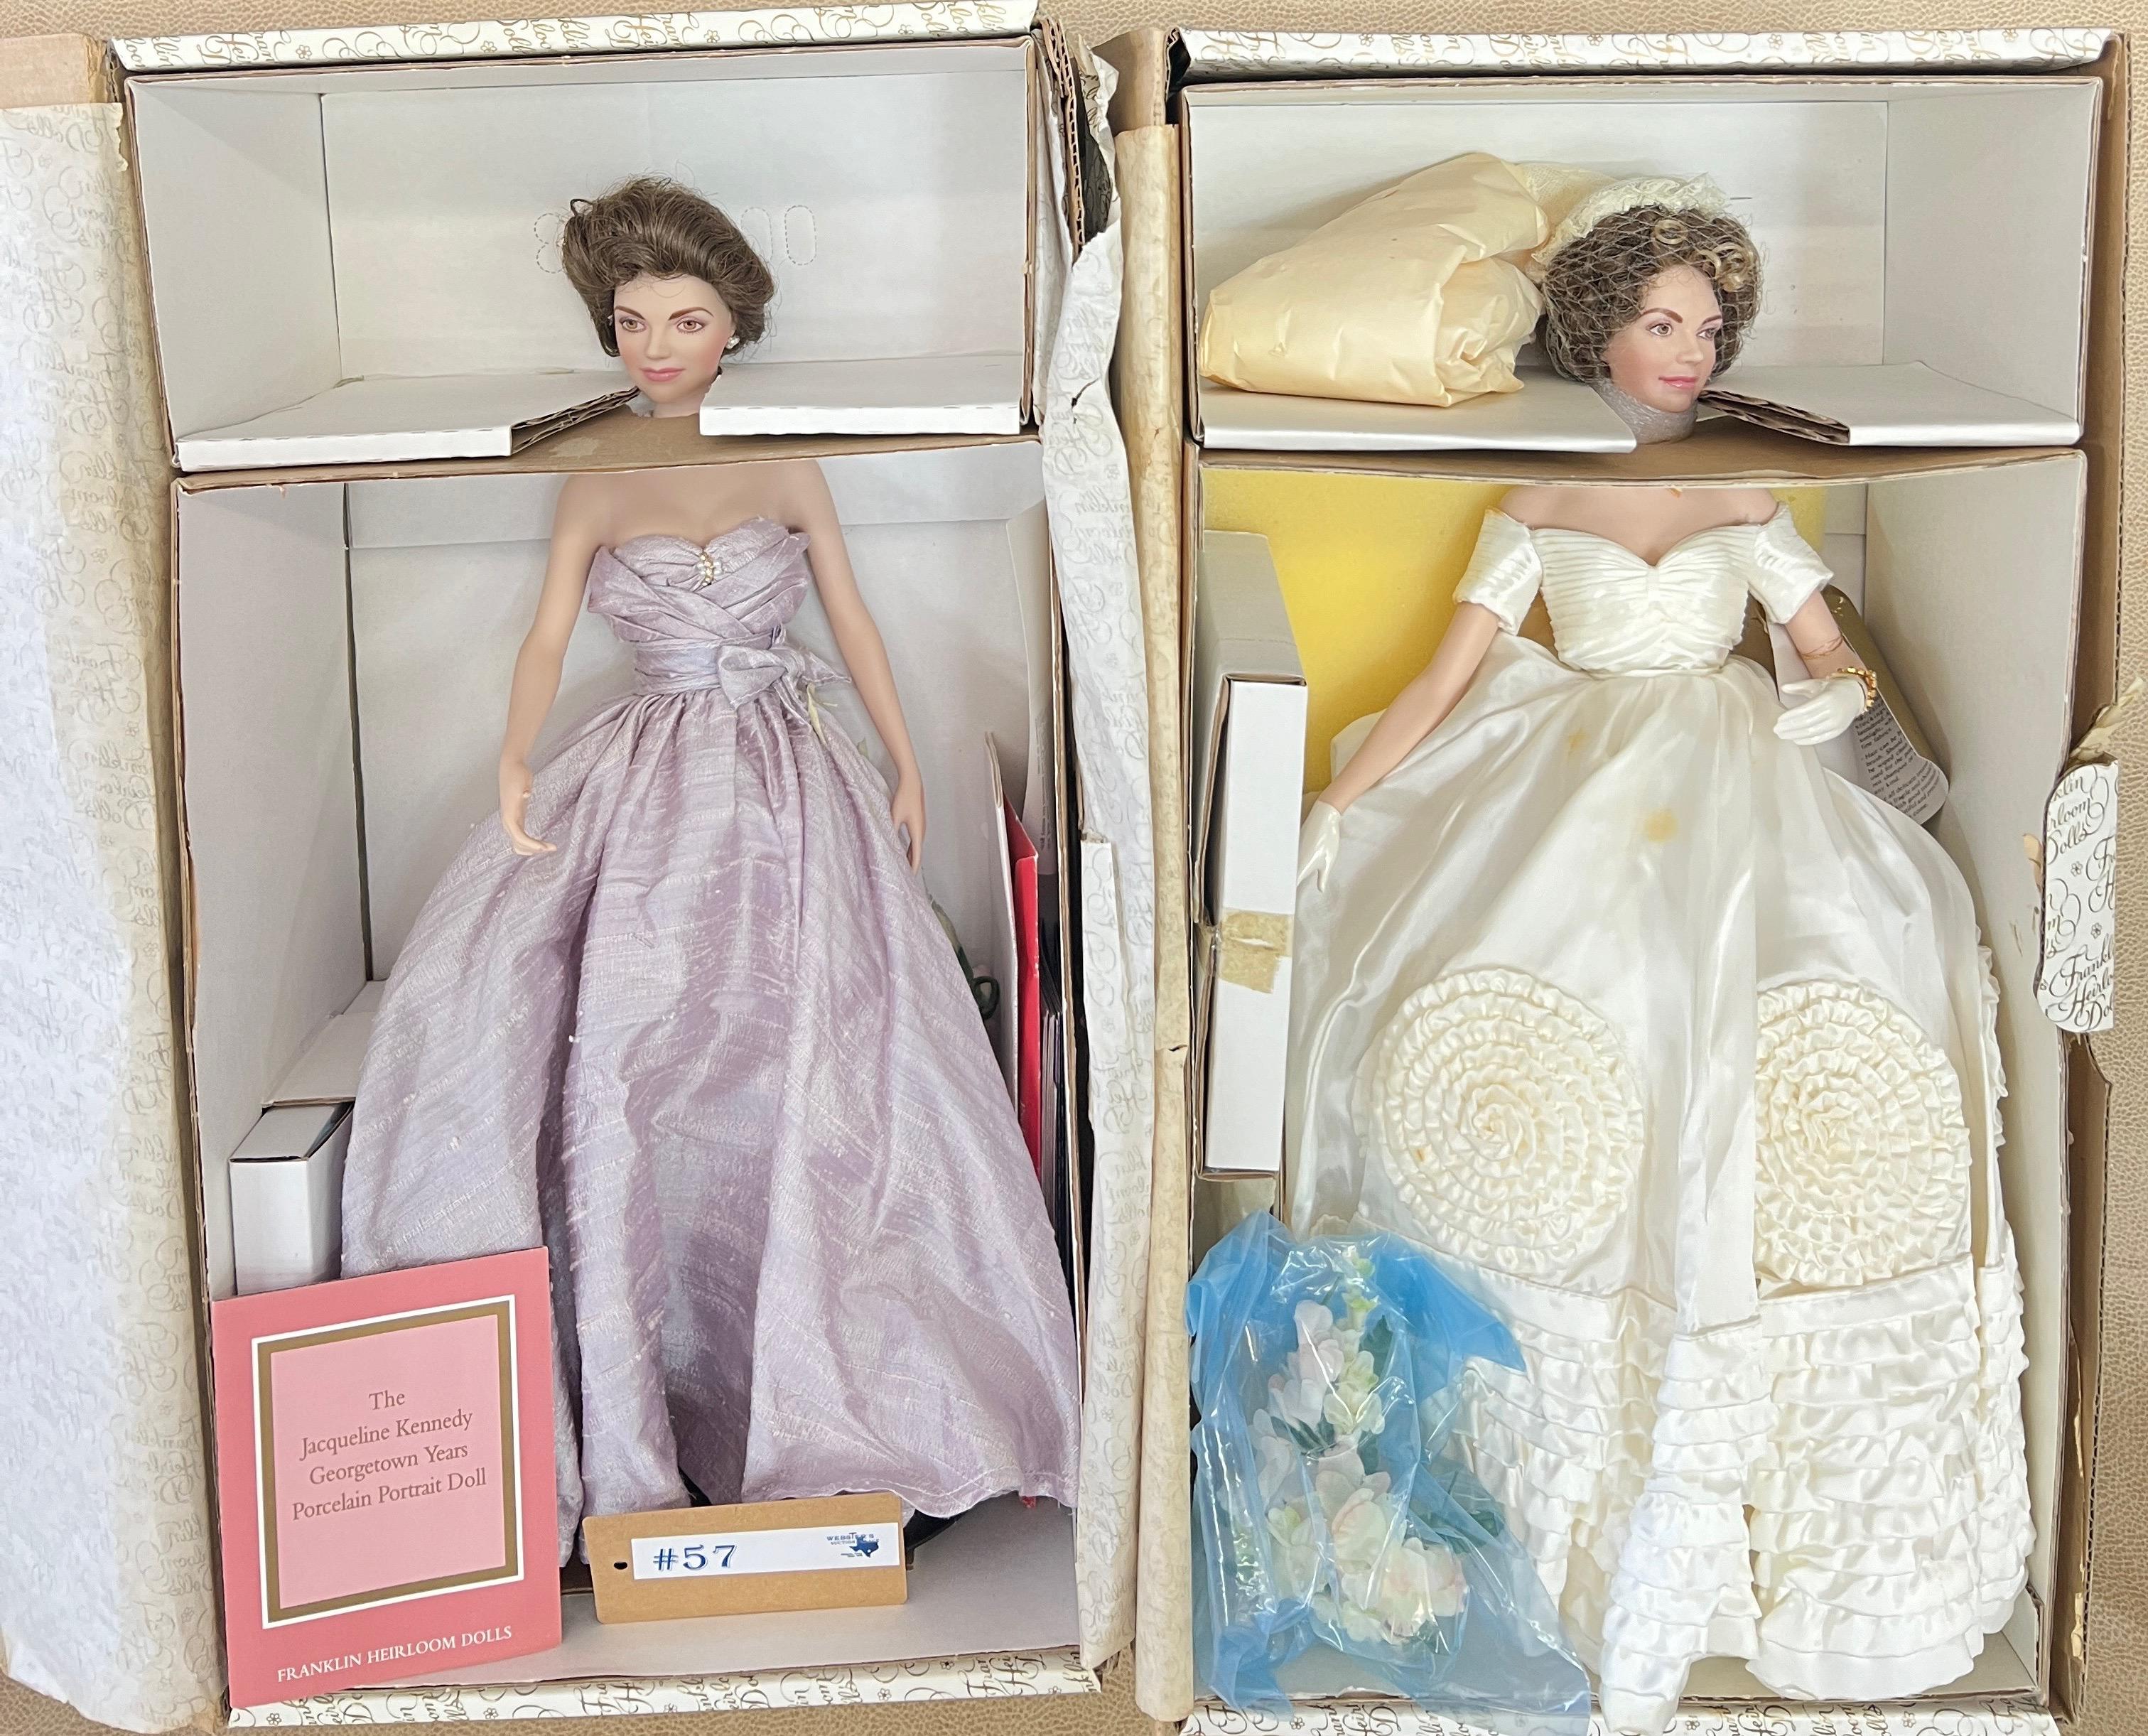 2PC FRANKLIN MINT "JAQUELINE KENNEDY" HEIRLOOM COLLECTION DOLLS IN BOXES